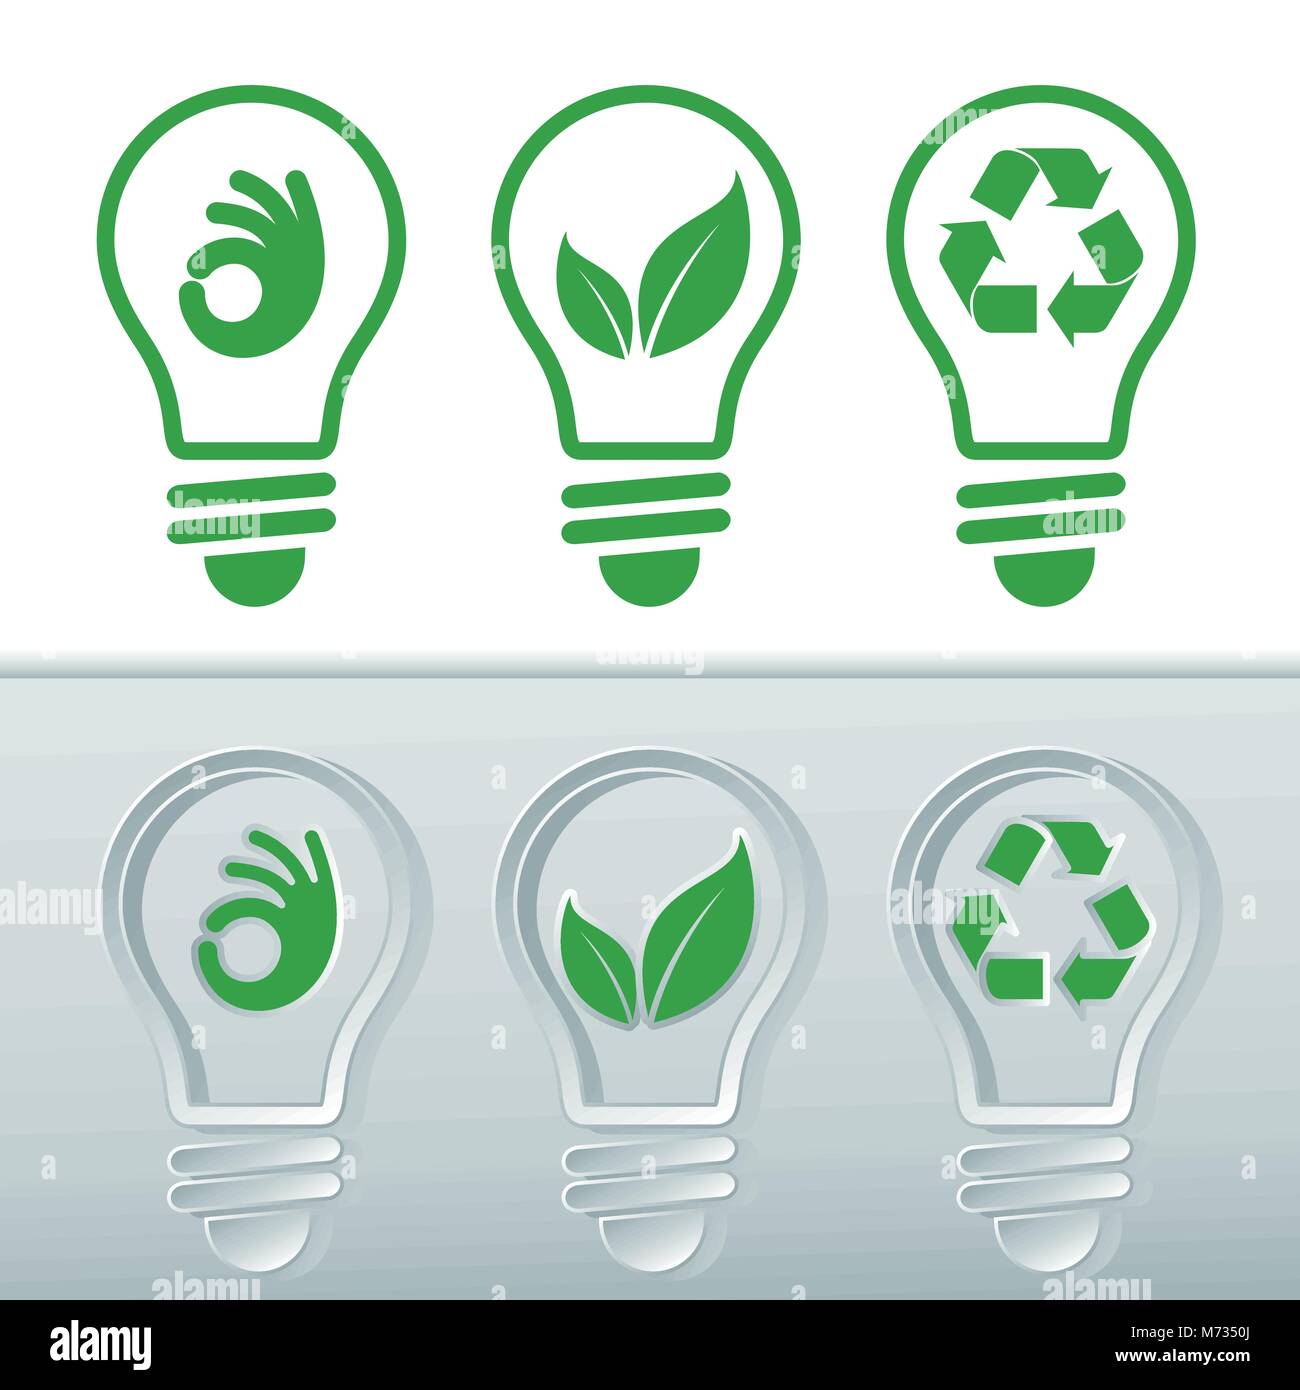 Vectorized icon sets for renewable energies. Light bulbs with icons of clean energies, bulb with leaf, bulb with recycling symbol and bulb with hand s Stock Vector